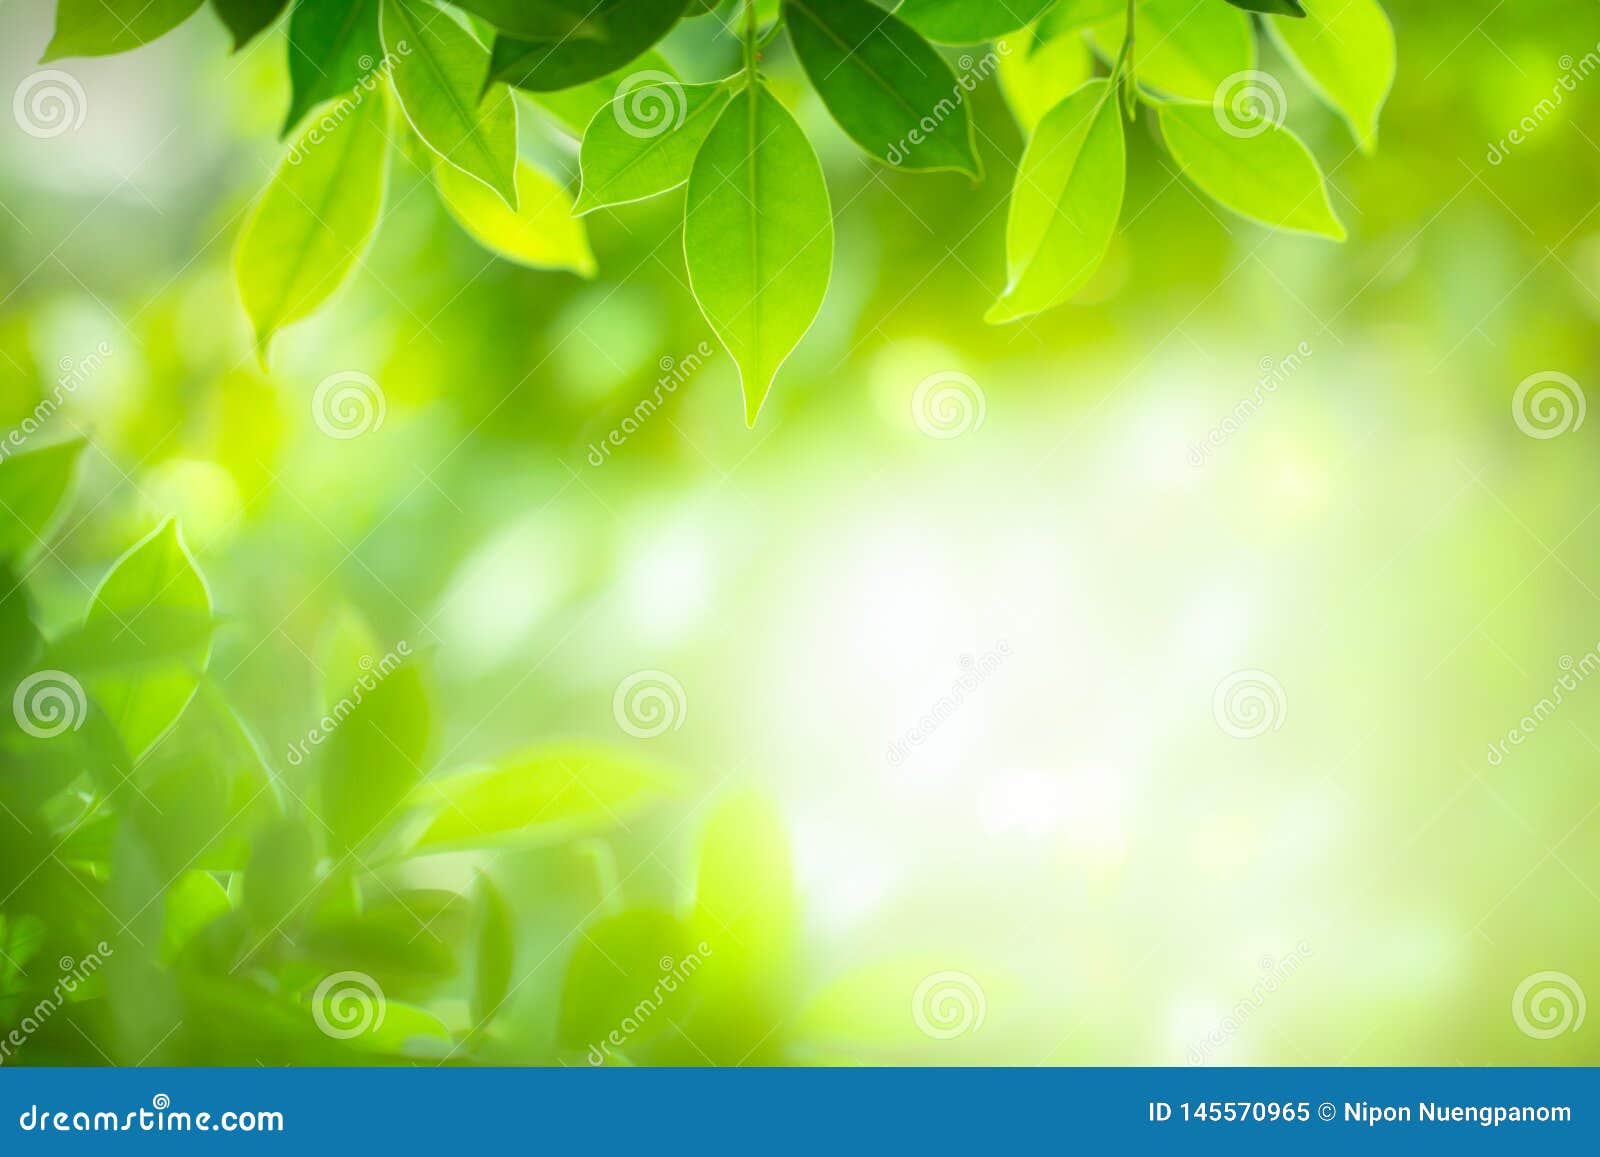 Closeup Green Leaf on Blurred Background Stock Image - Image of blur,  abstract: 145570965